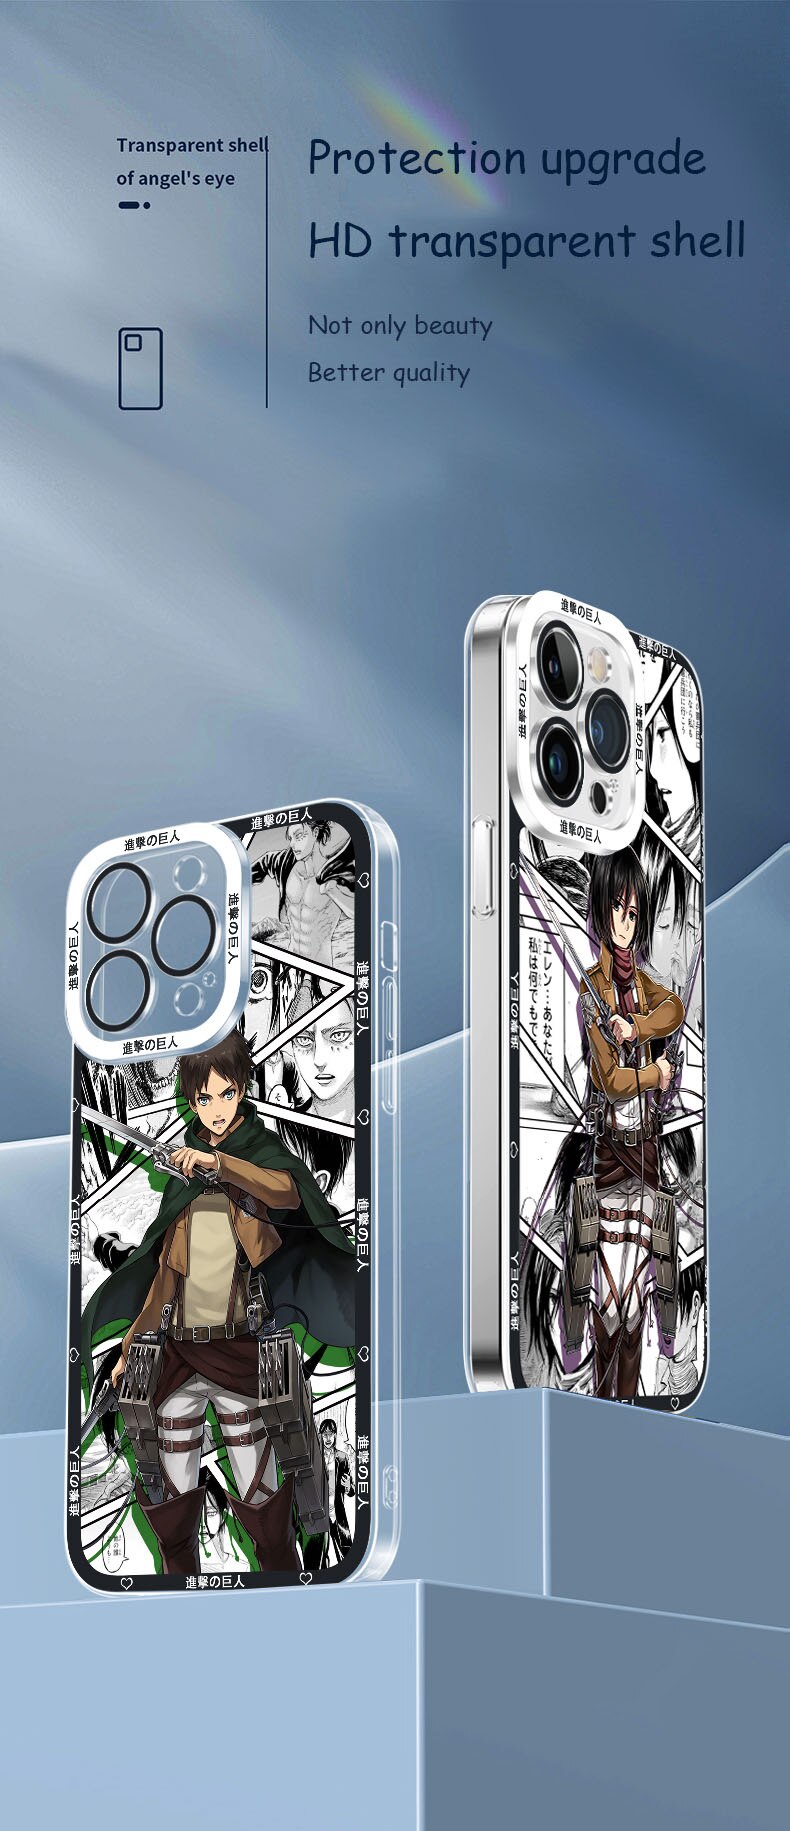 Attack on Titan | Eren Yeager | Anime Phone Case